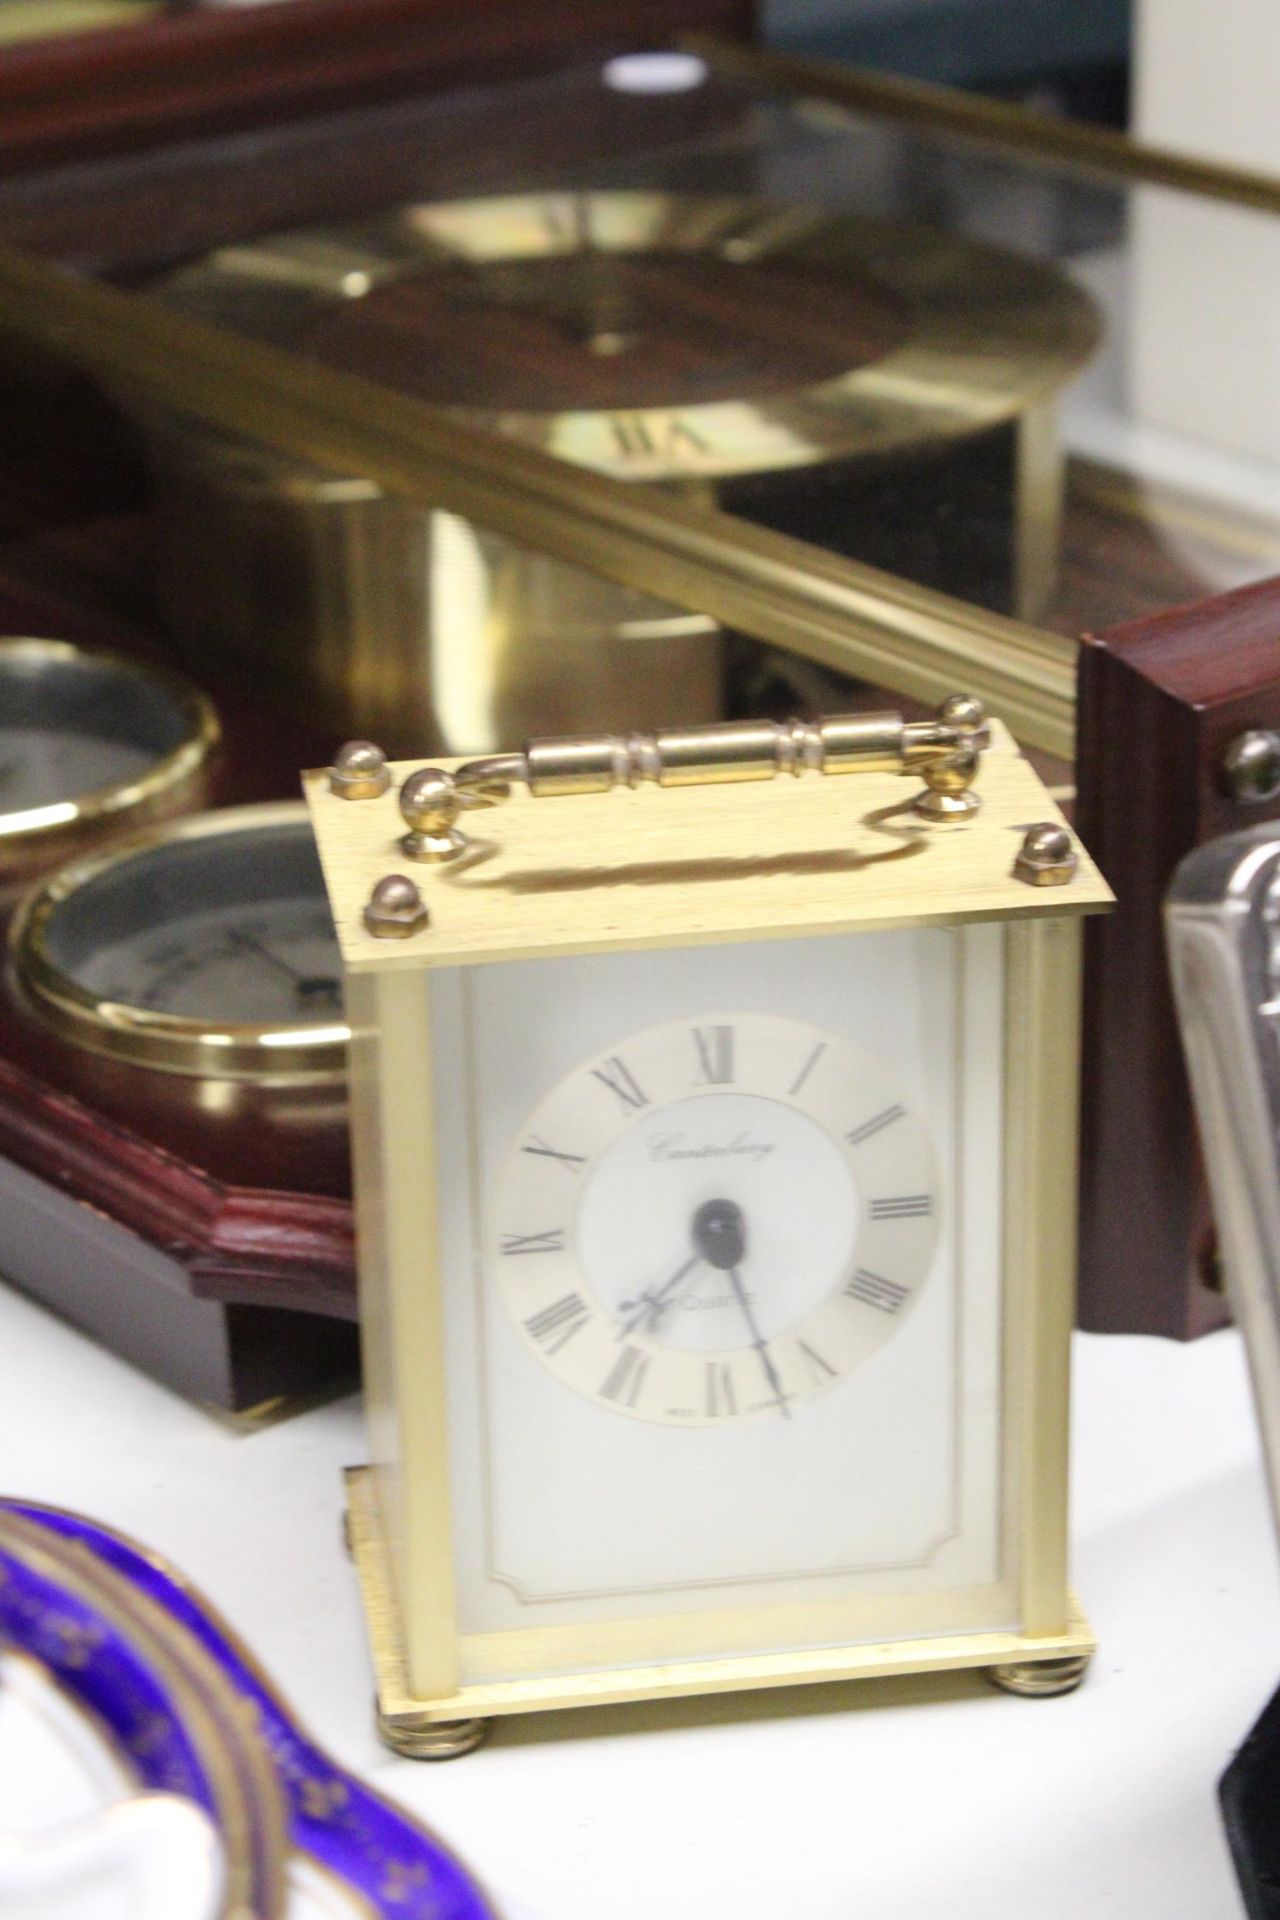 A METAMAC QUARTZ WALL CLOCK, A CARRIAGE CLOCK AND A BAROMETER, CLOCK AND THERMOMETER IN A WOODEN - Image 4 of 6